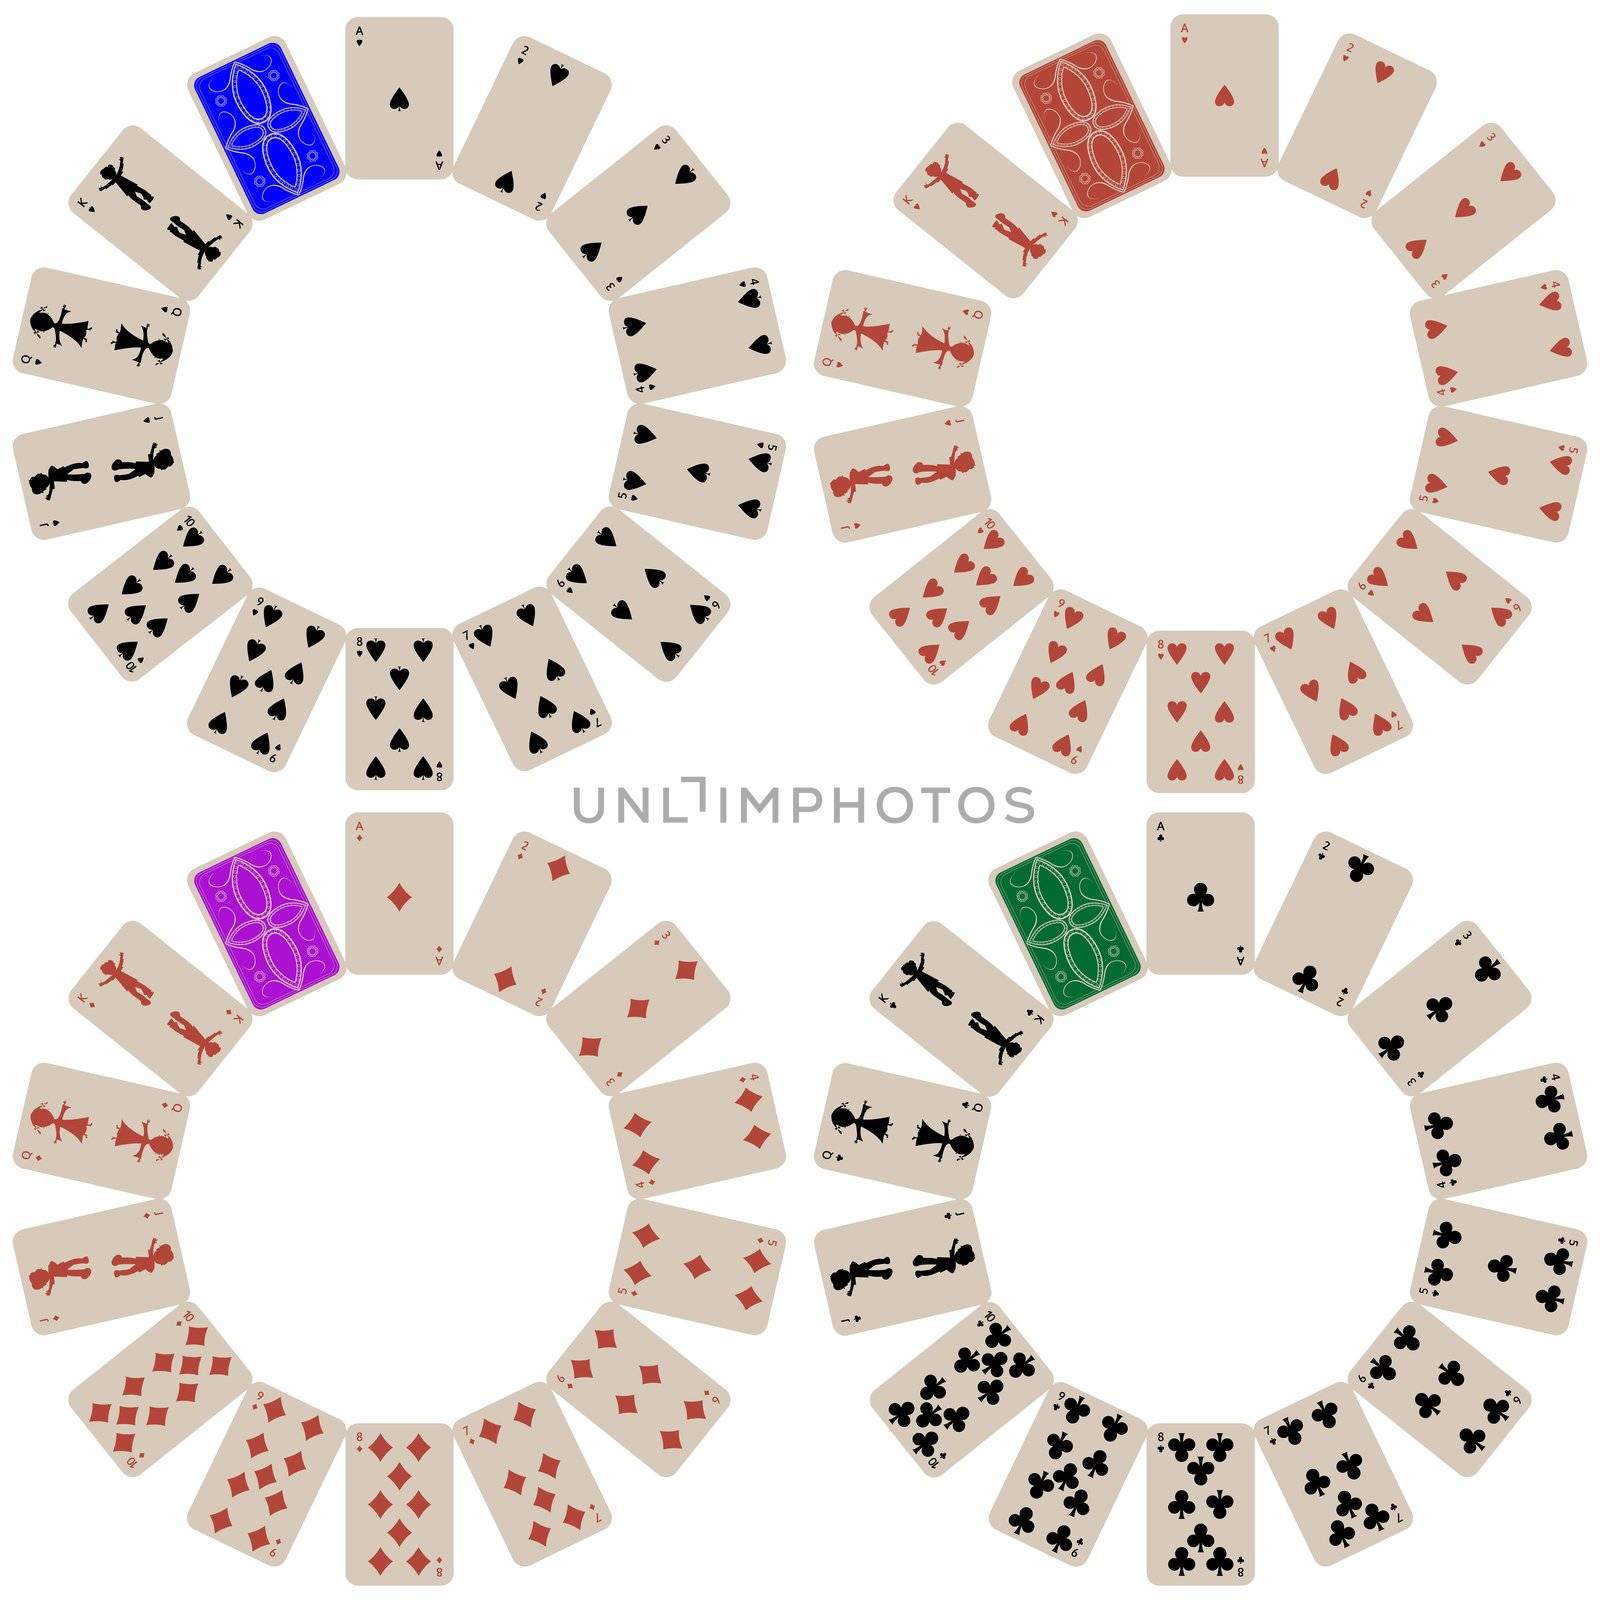 circle shape playing cards collection isolated on white background, abstract art illustration